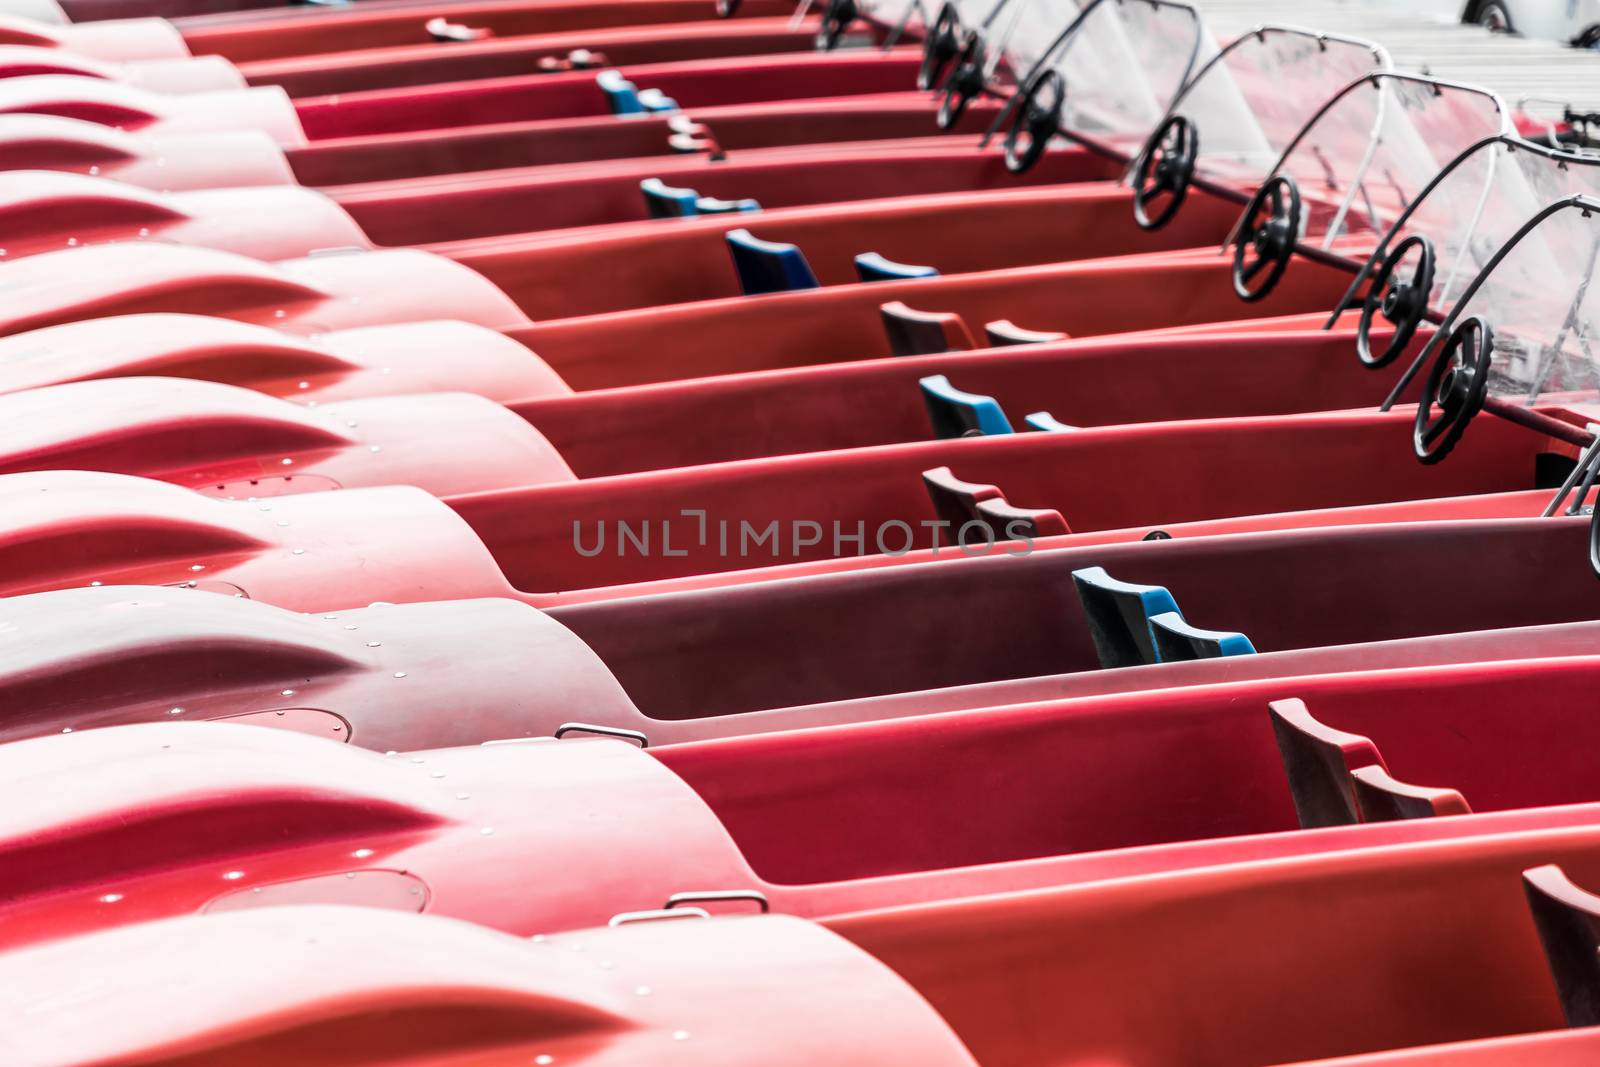 Abstract photo of red pedal boats moored at the jetty on a lake by geogif